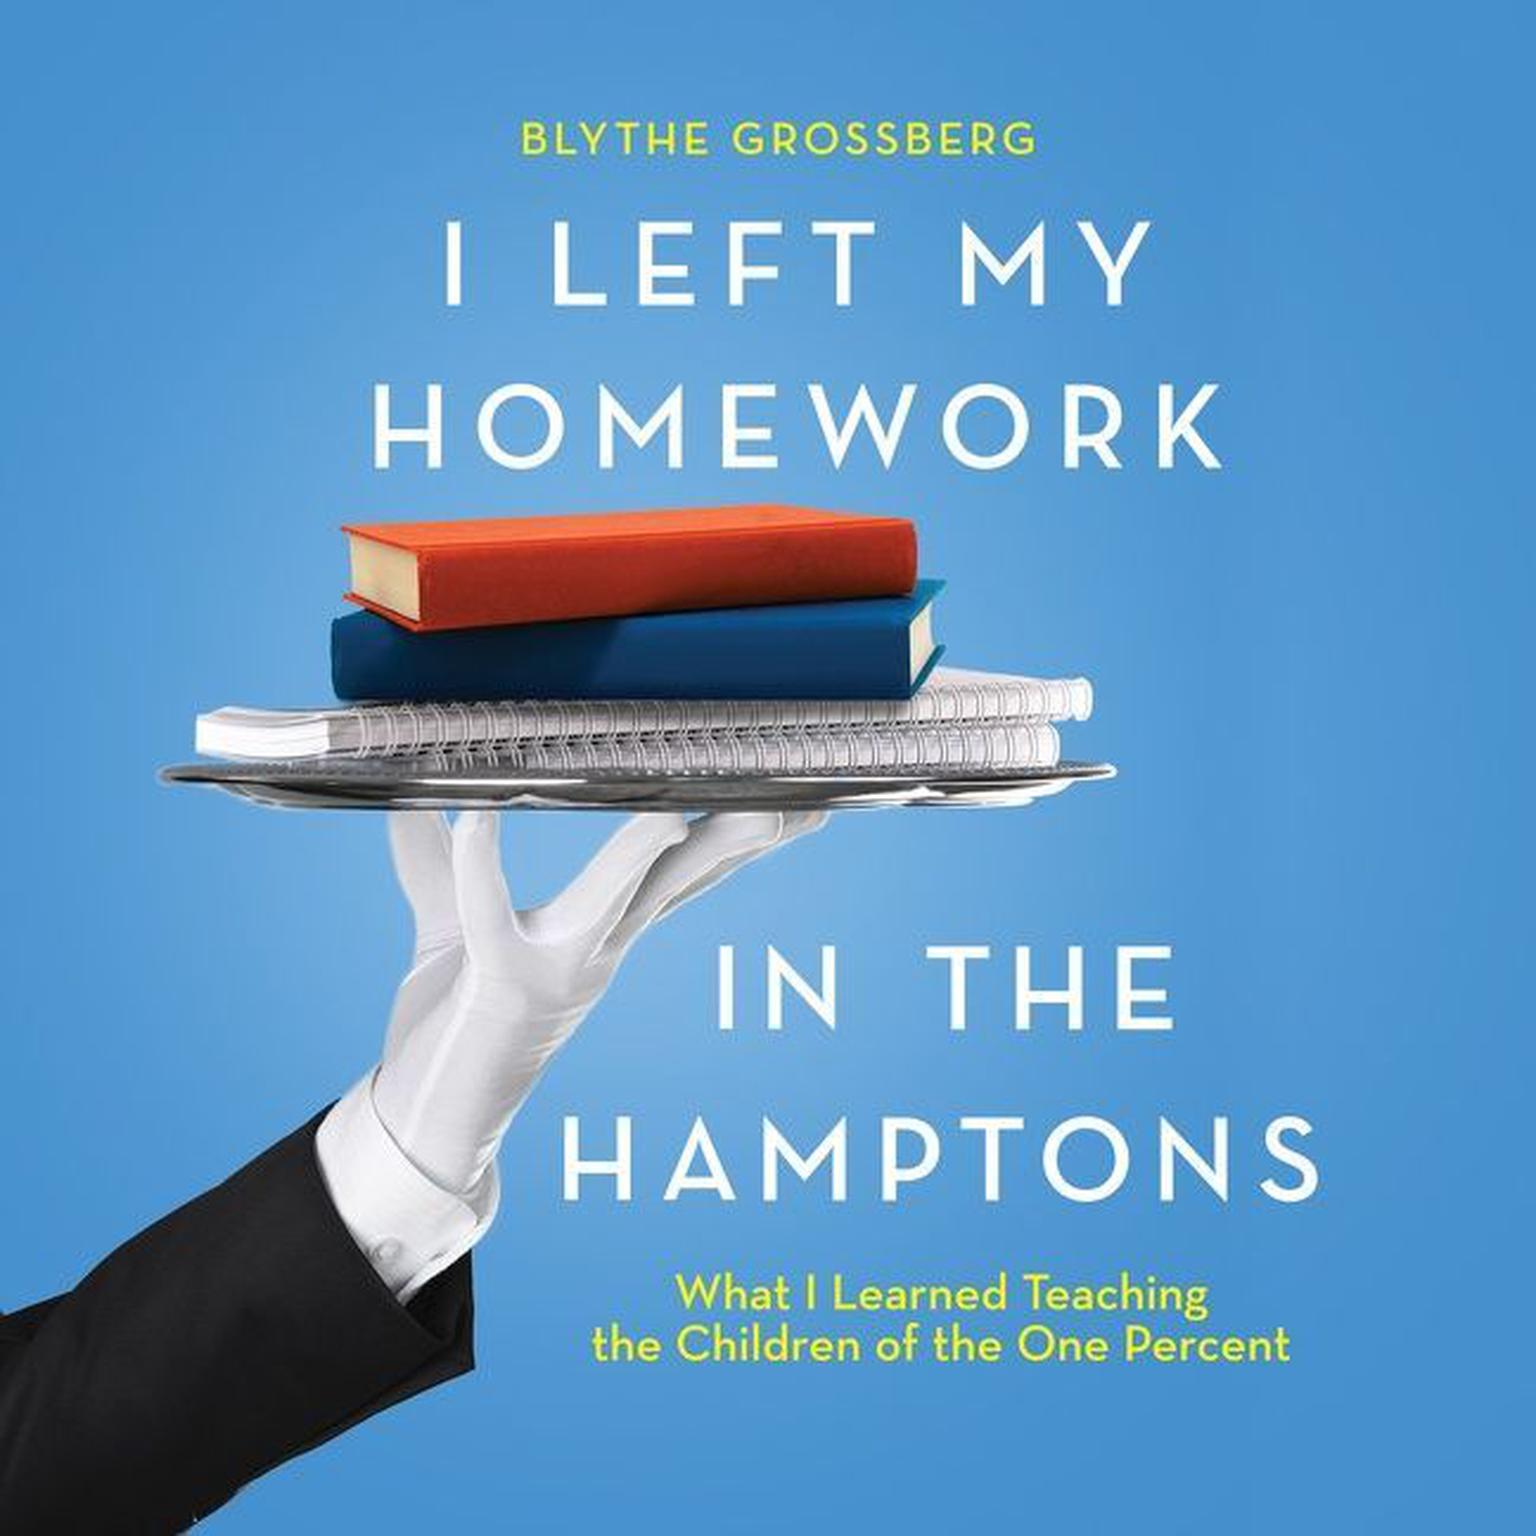 I Left My Homework in the Hamptons: What I Learned Teaching the Children of the One Percent Audiobook, by Blythe Grossberg